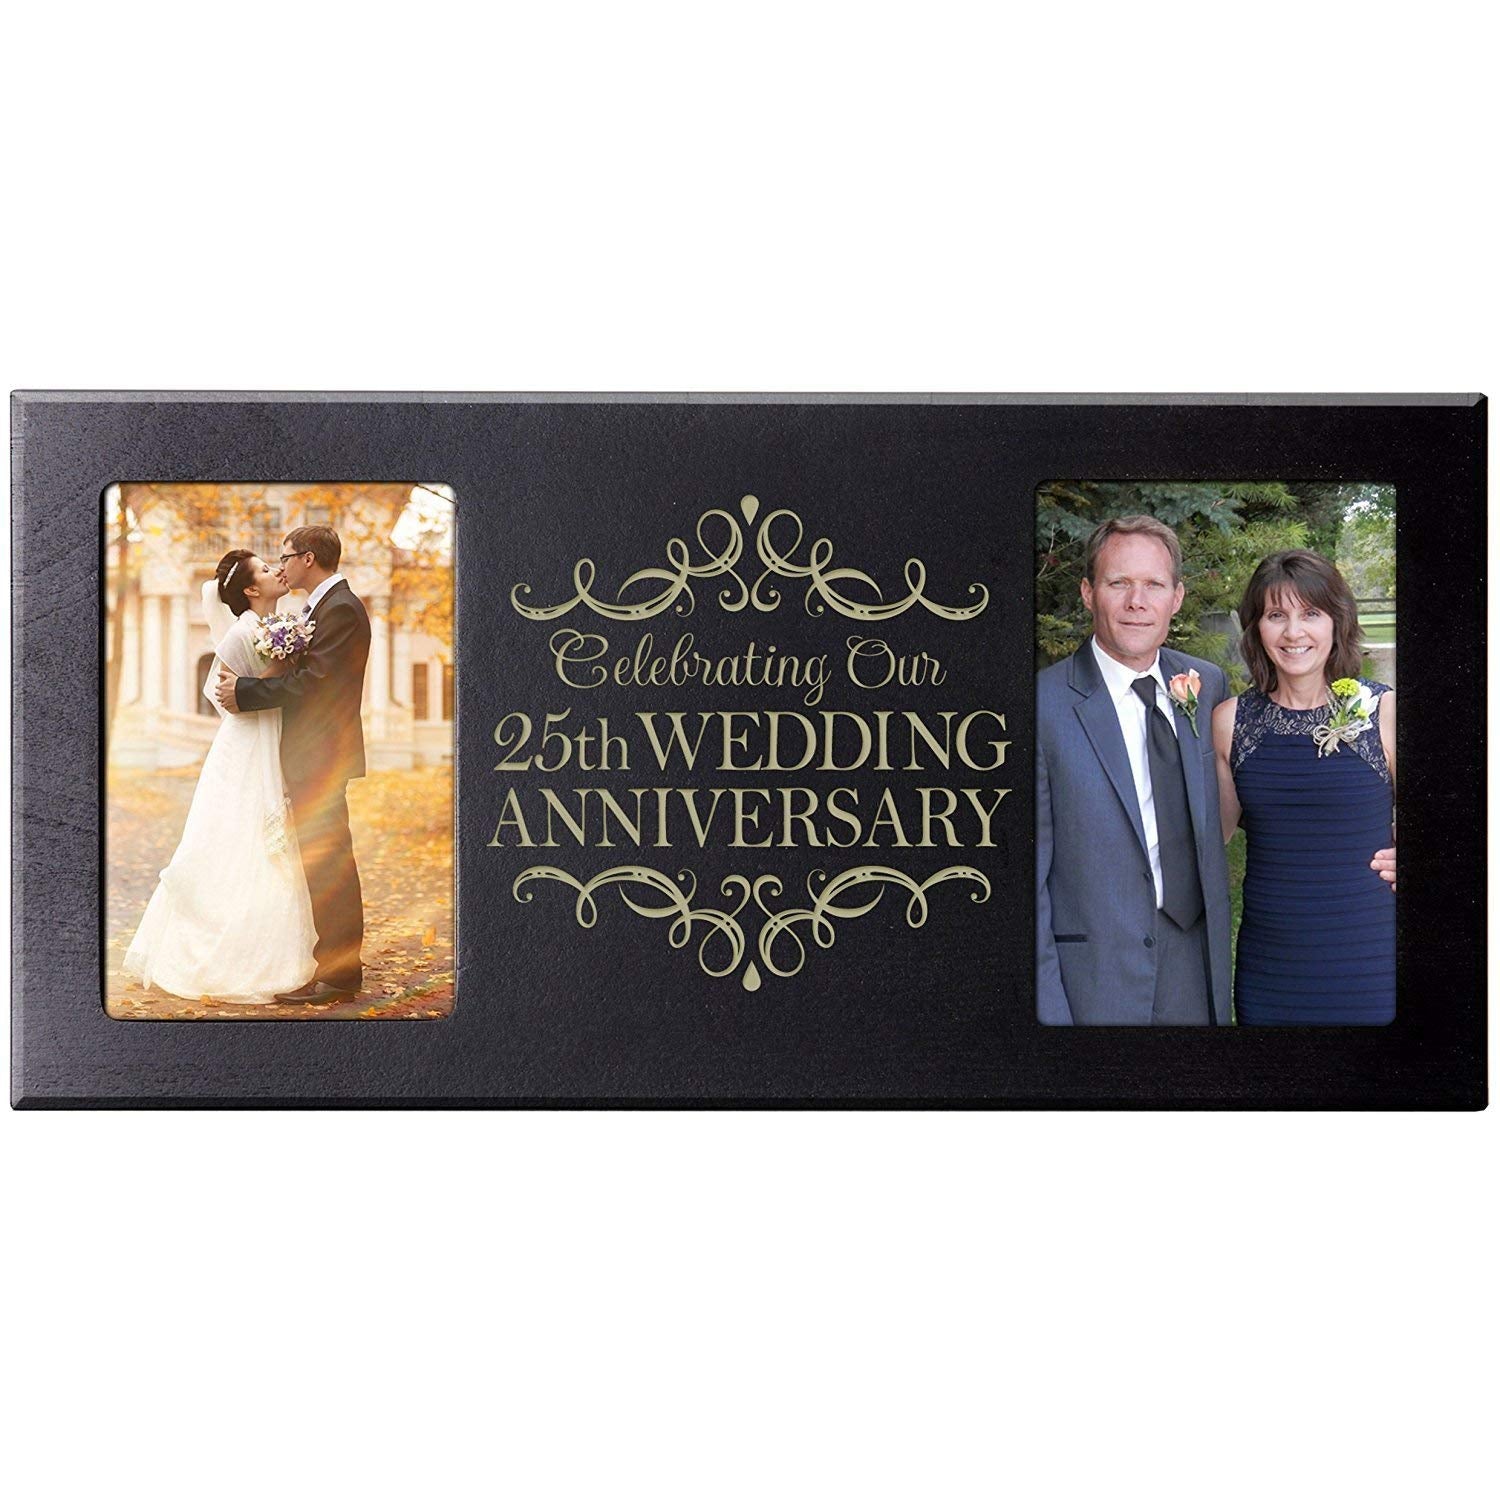 Lifesong Milestones Unique 25th Wedding Anniversary Double Photo Frame Gift Ideas for Couples